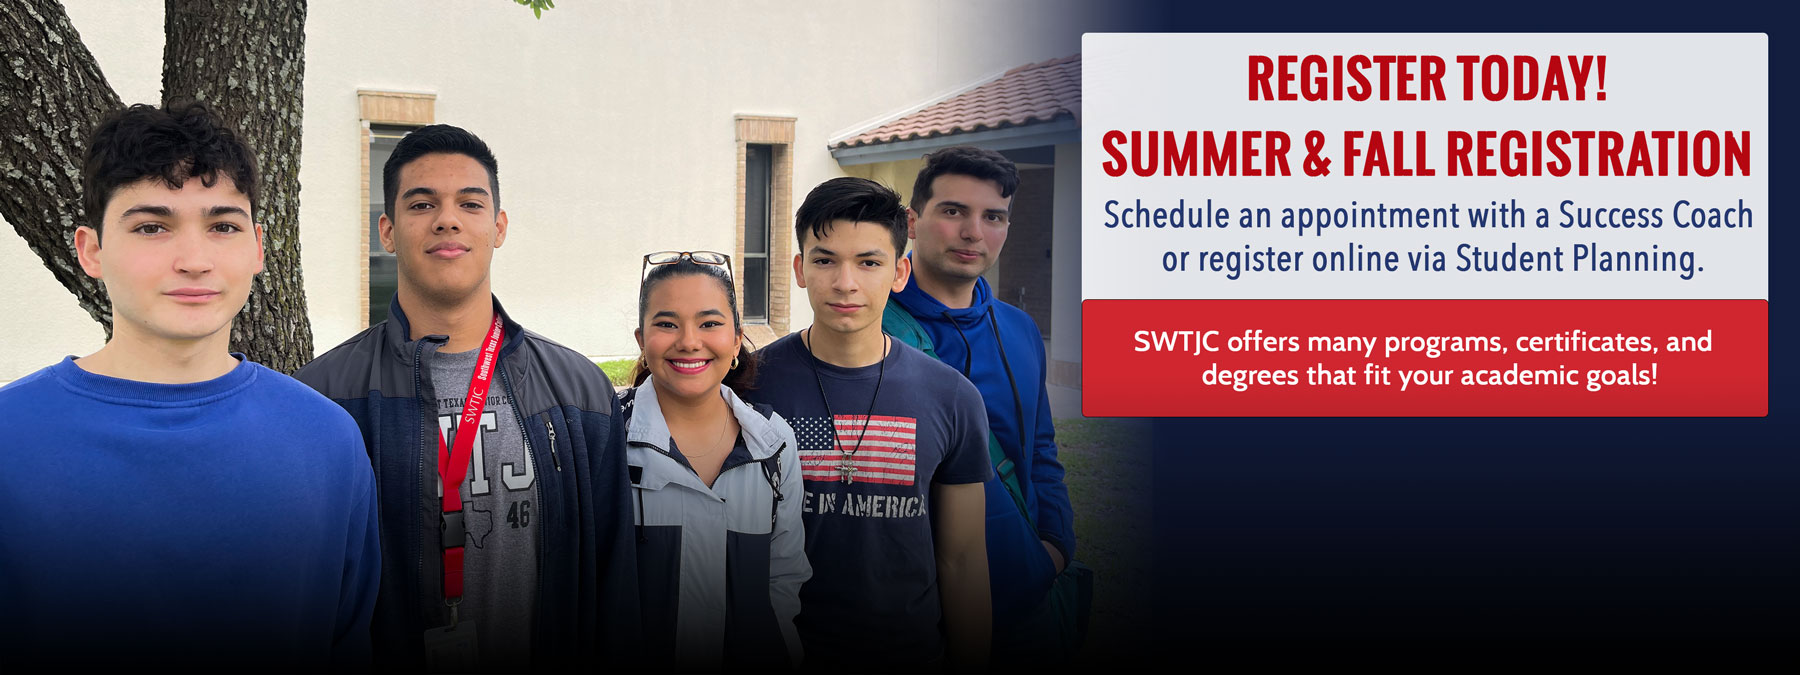 Picture of five students posing in front of a building at the Eagle Pass campus. Informative text: Register Today! Summer & Fall Registration. Schedule an appointment with a Success Coach or register online via Student Planning. SWTJC offers many programs, certificates, and degrees that fit your academic goals.